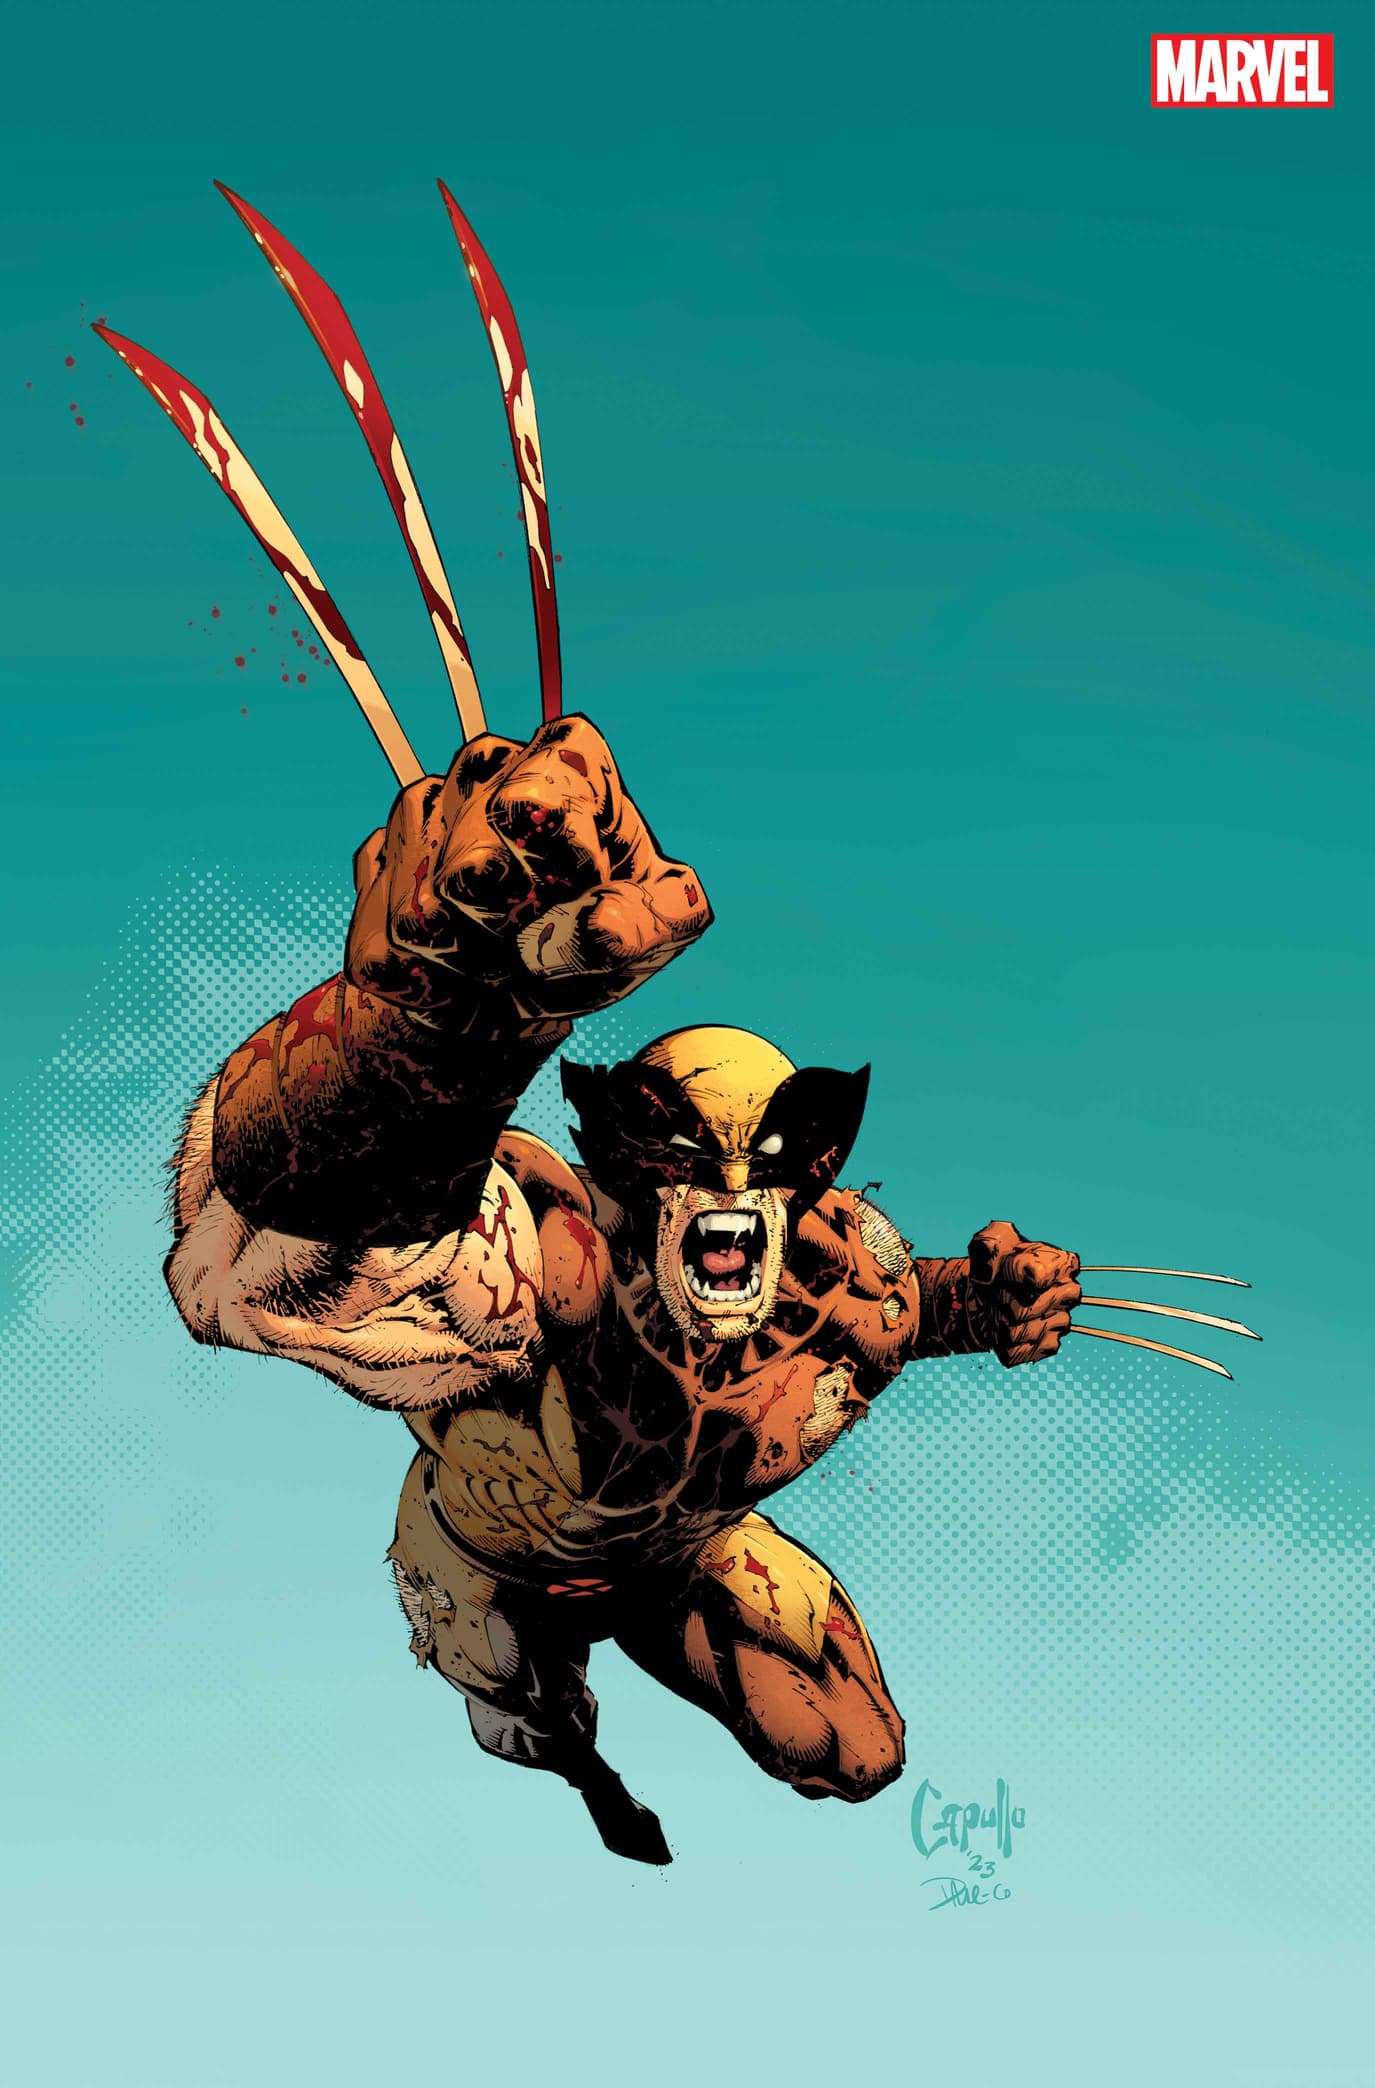 WOLVERINE #37 variant cover by Greg Capullo